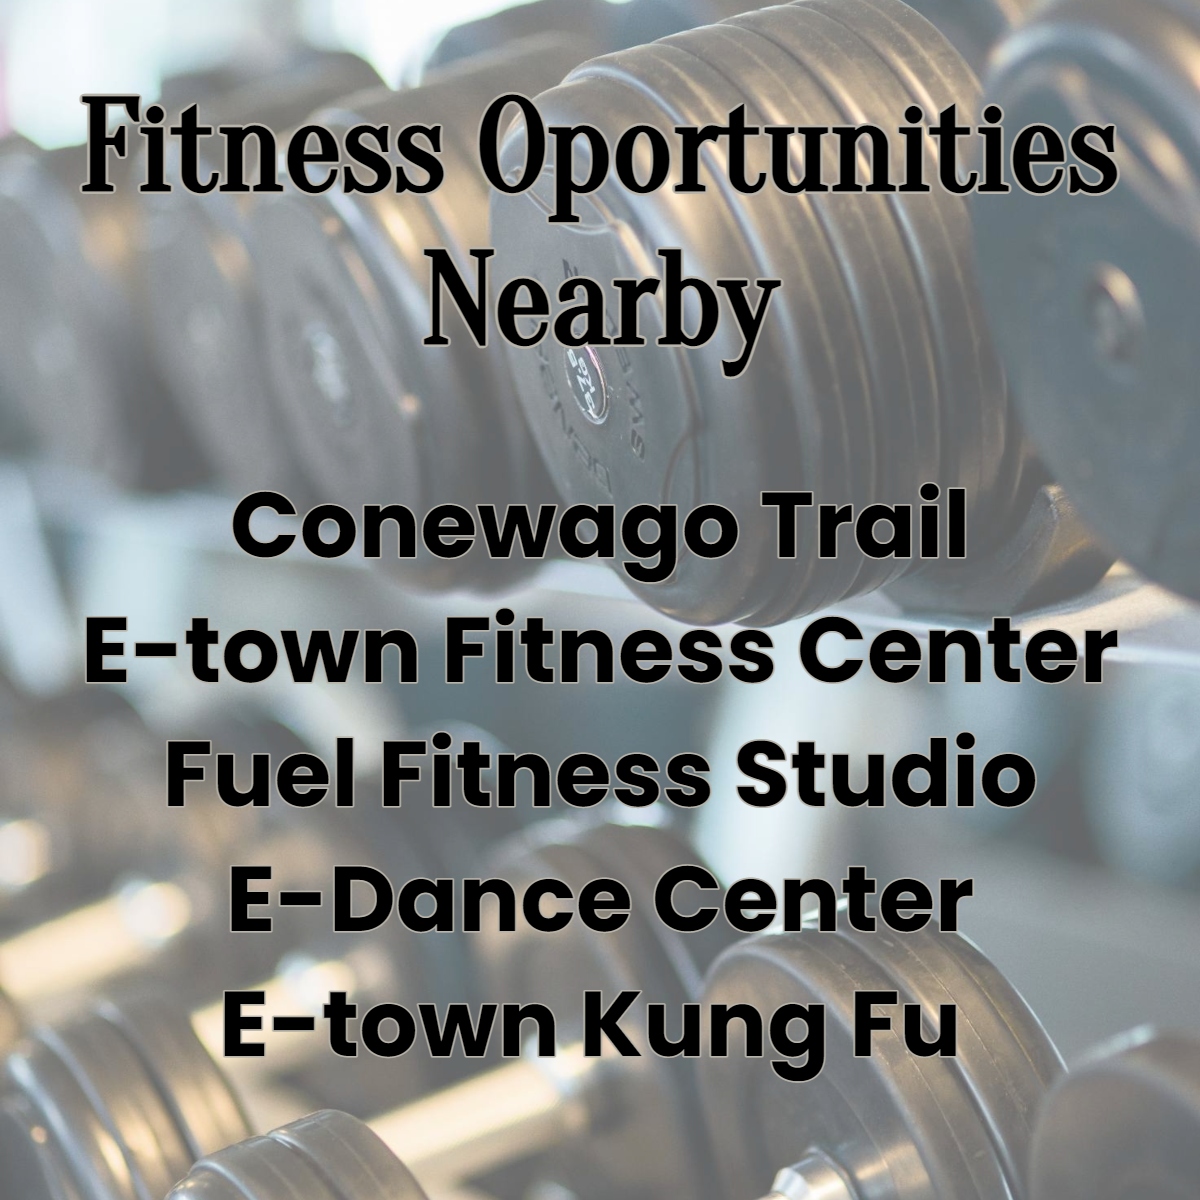 Fitness opportunities nearby